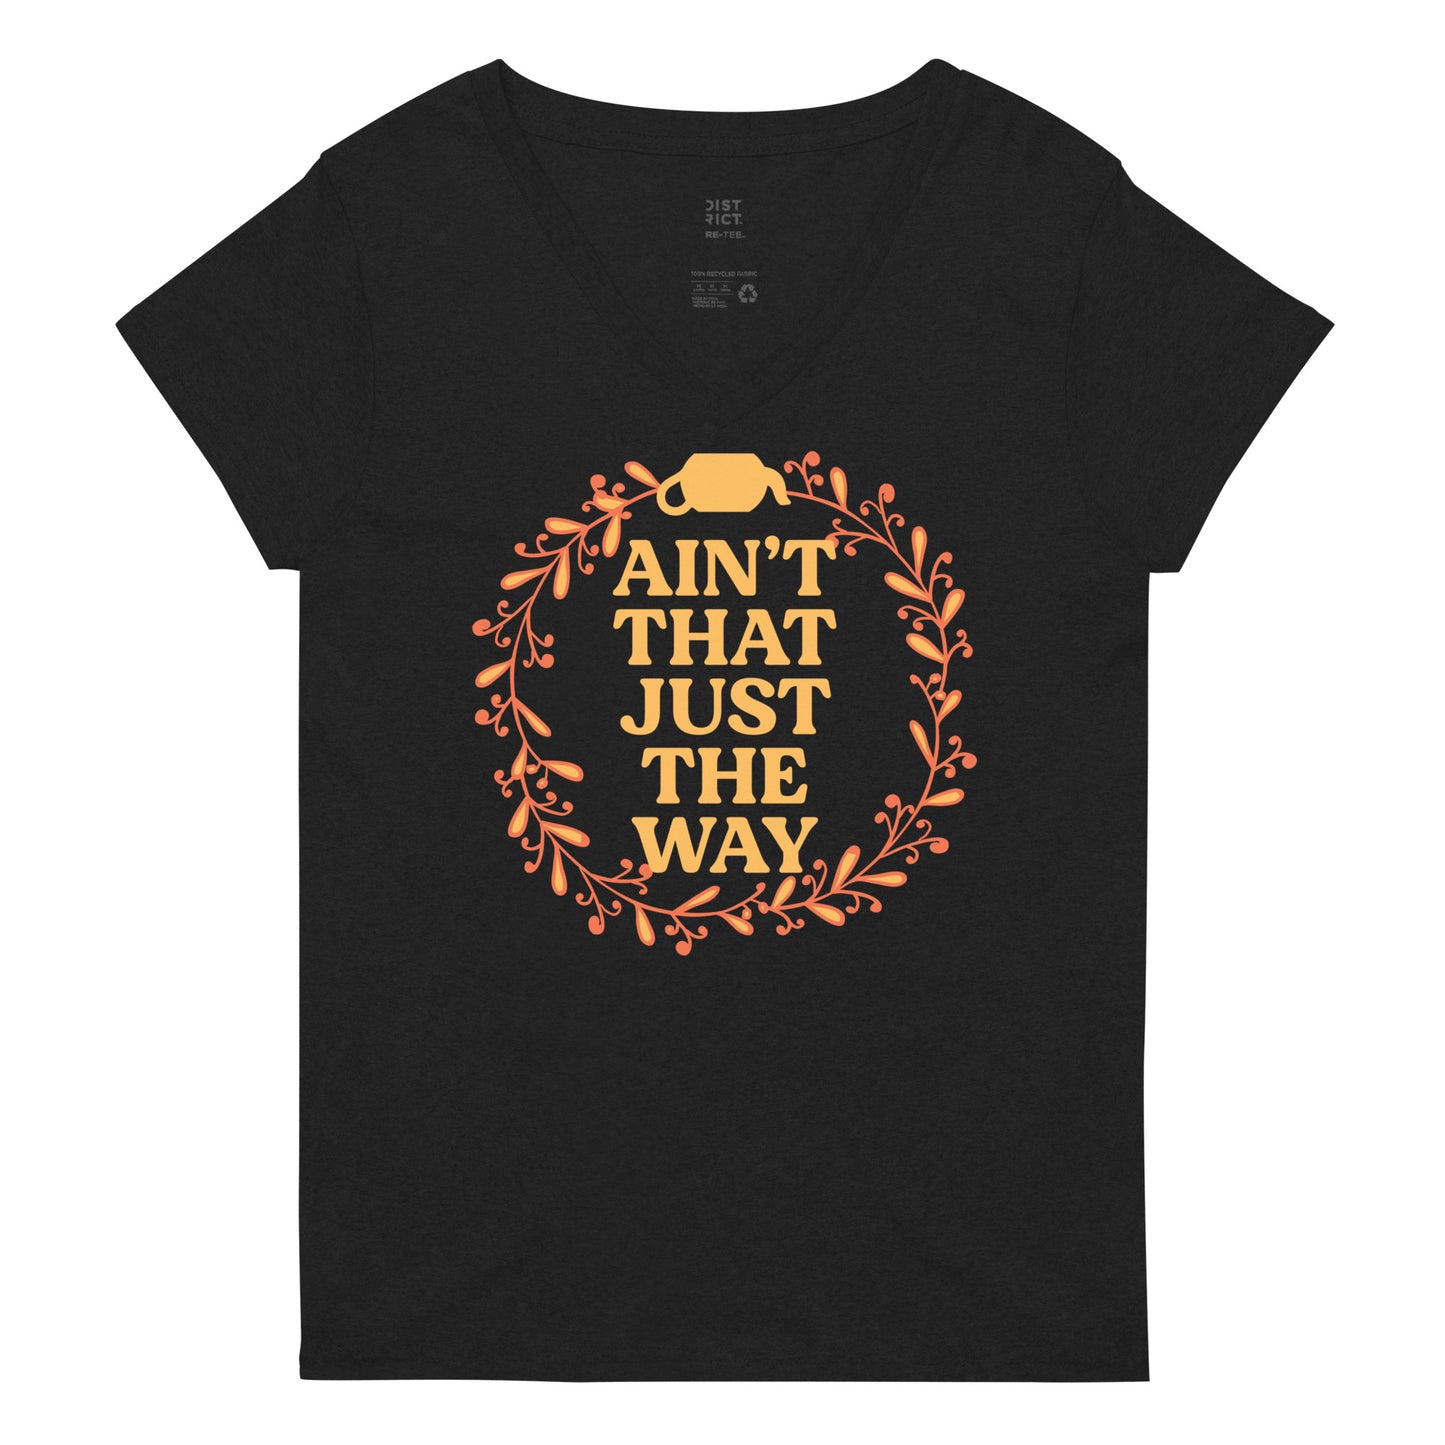 Ain't That Just The Way Women's V-Neck Tee